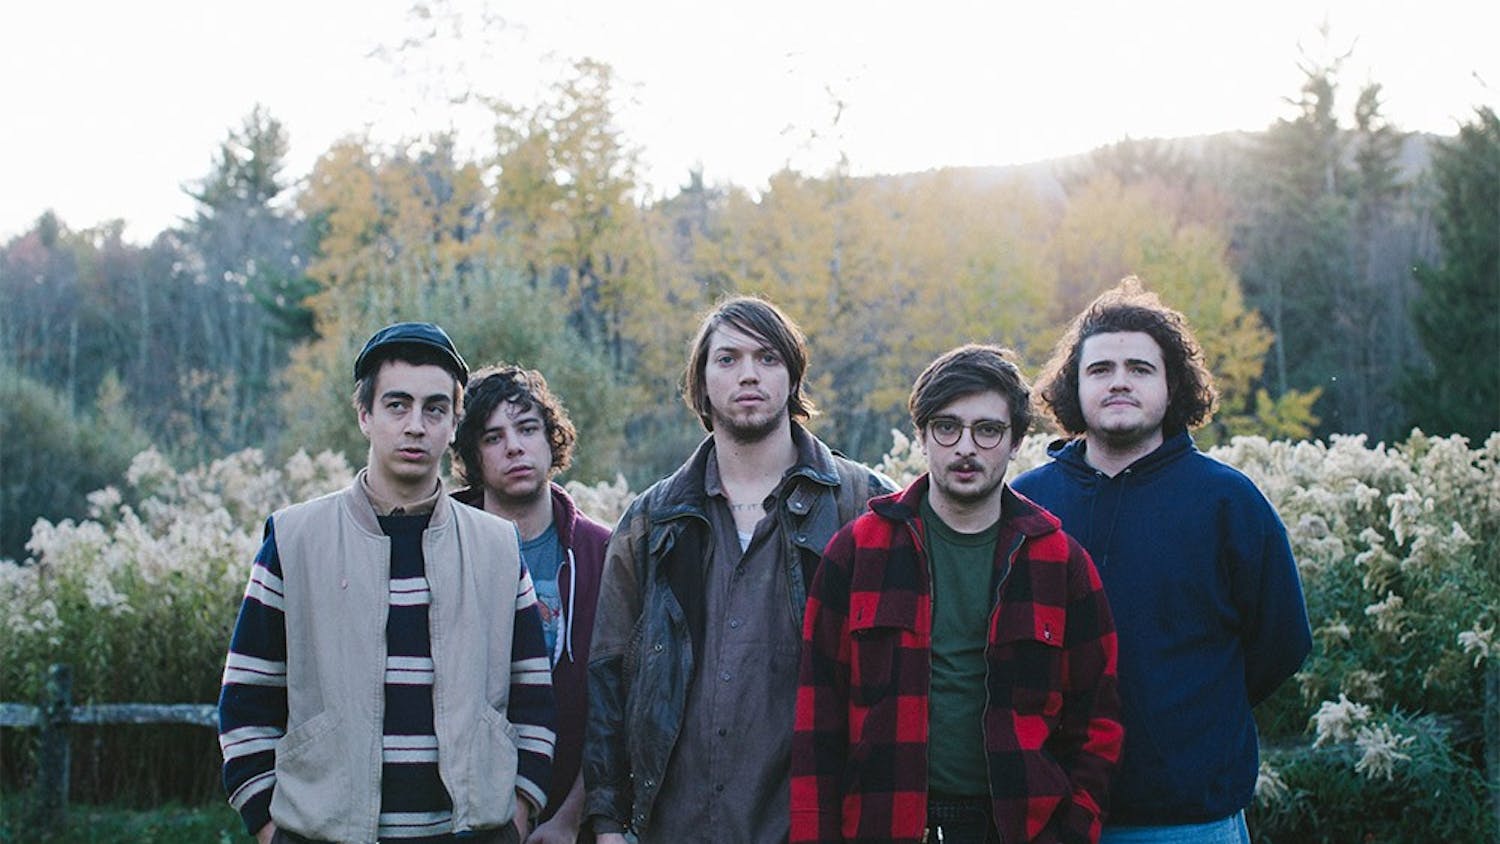 Twin Peaks is an indie-rock band from Chicago that have gained popularity in the past few years. They are releasing an album entitled "Down in Heaven" on May 13th and will play the Blockhouse tomorrow.